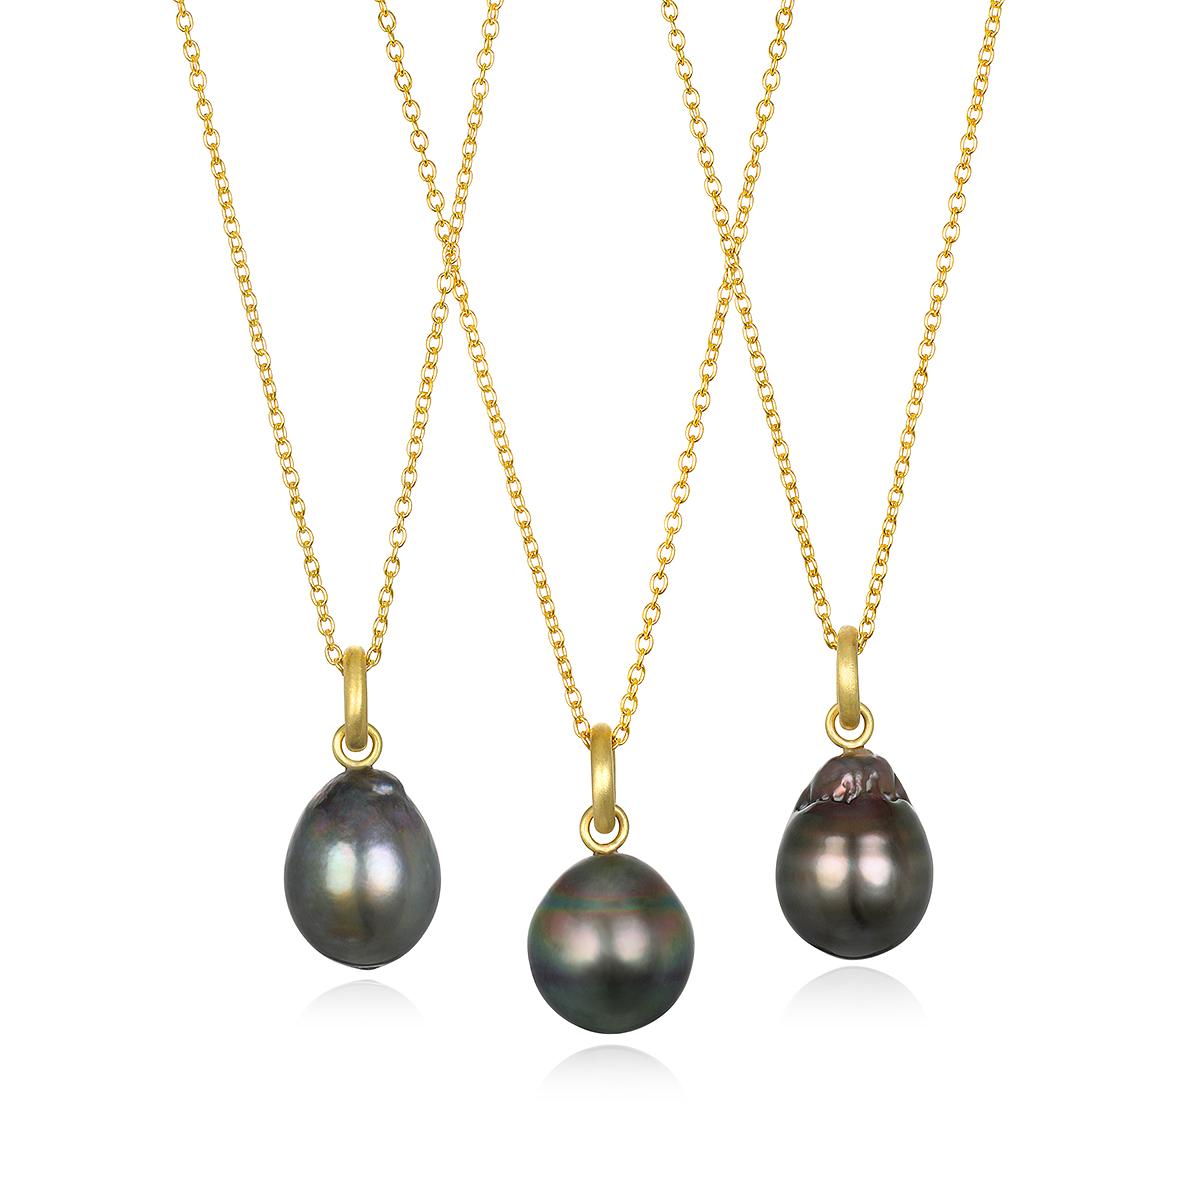 Faye Kim has handcrafted this 18K Gold* Black Tahitian Baroque Pearl, with its variations of black, gray, and green, into a statement-making pendant, which can be worn alone or layered with other necklaces. Perfect for any occasion or event!
On